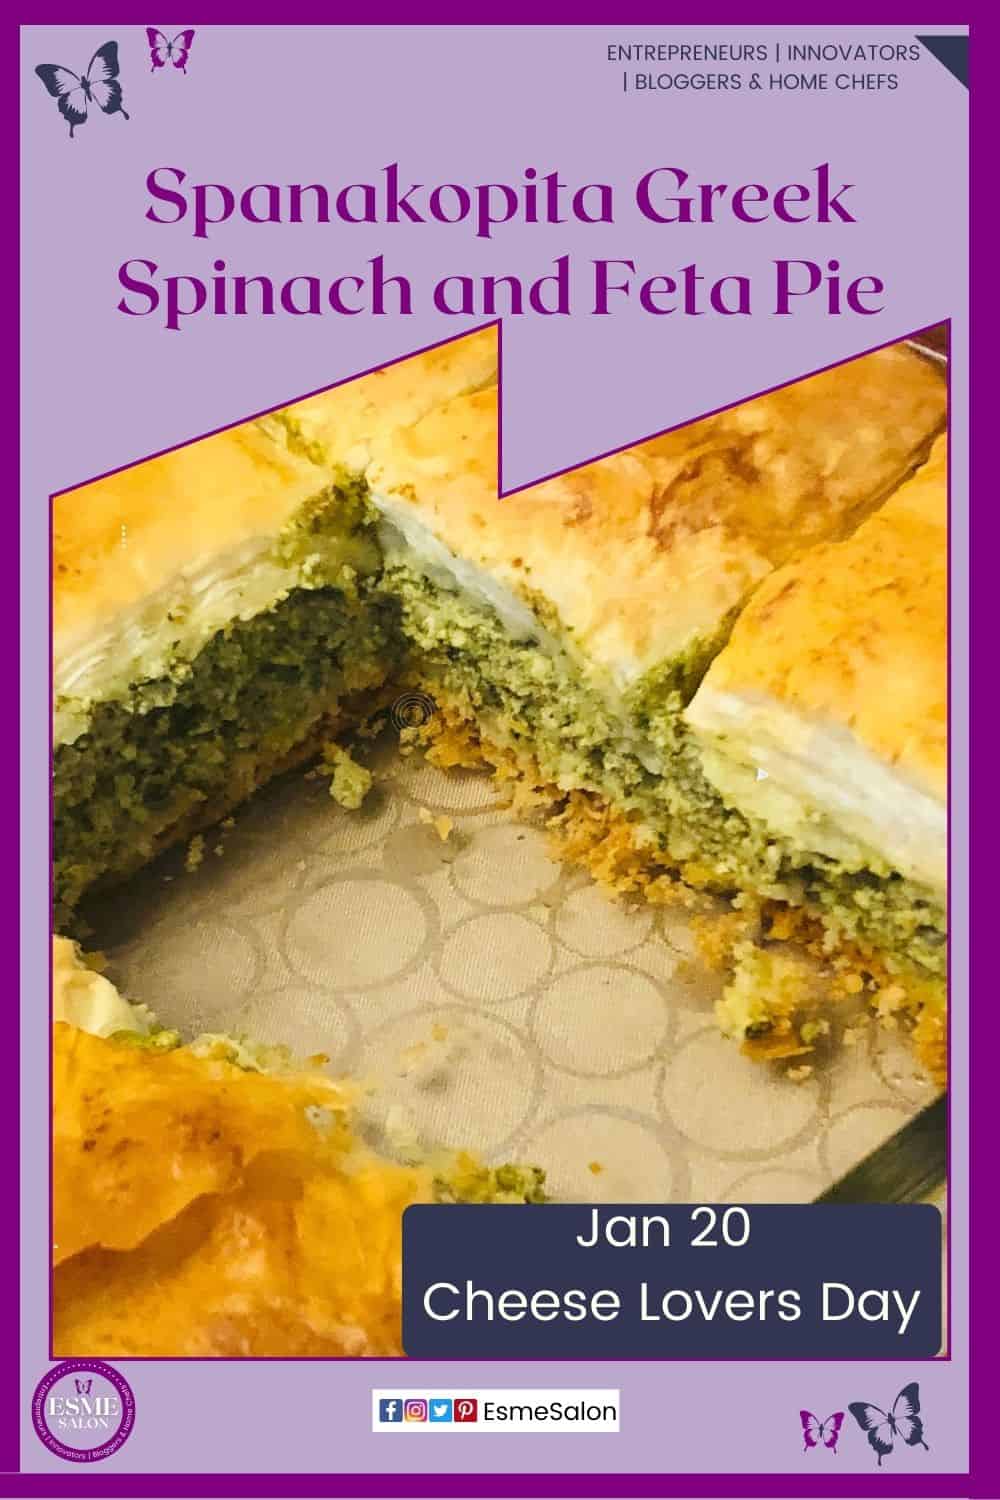 an image of a Spanakopita Greek Spinach and Feta Pie cut into cubes